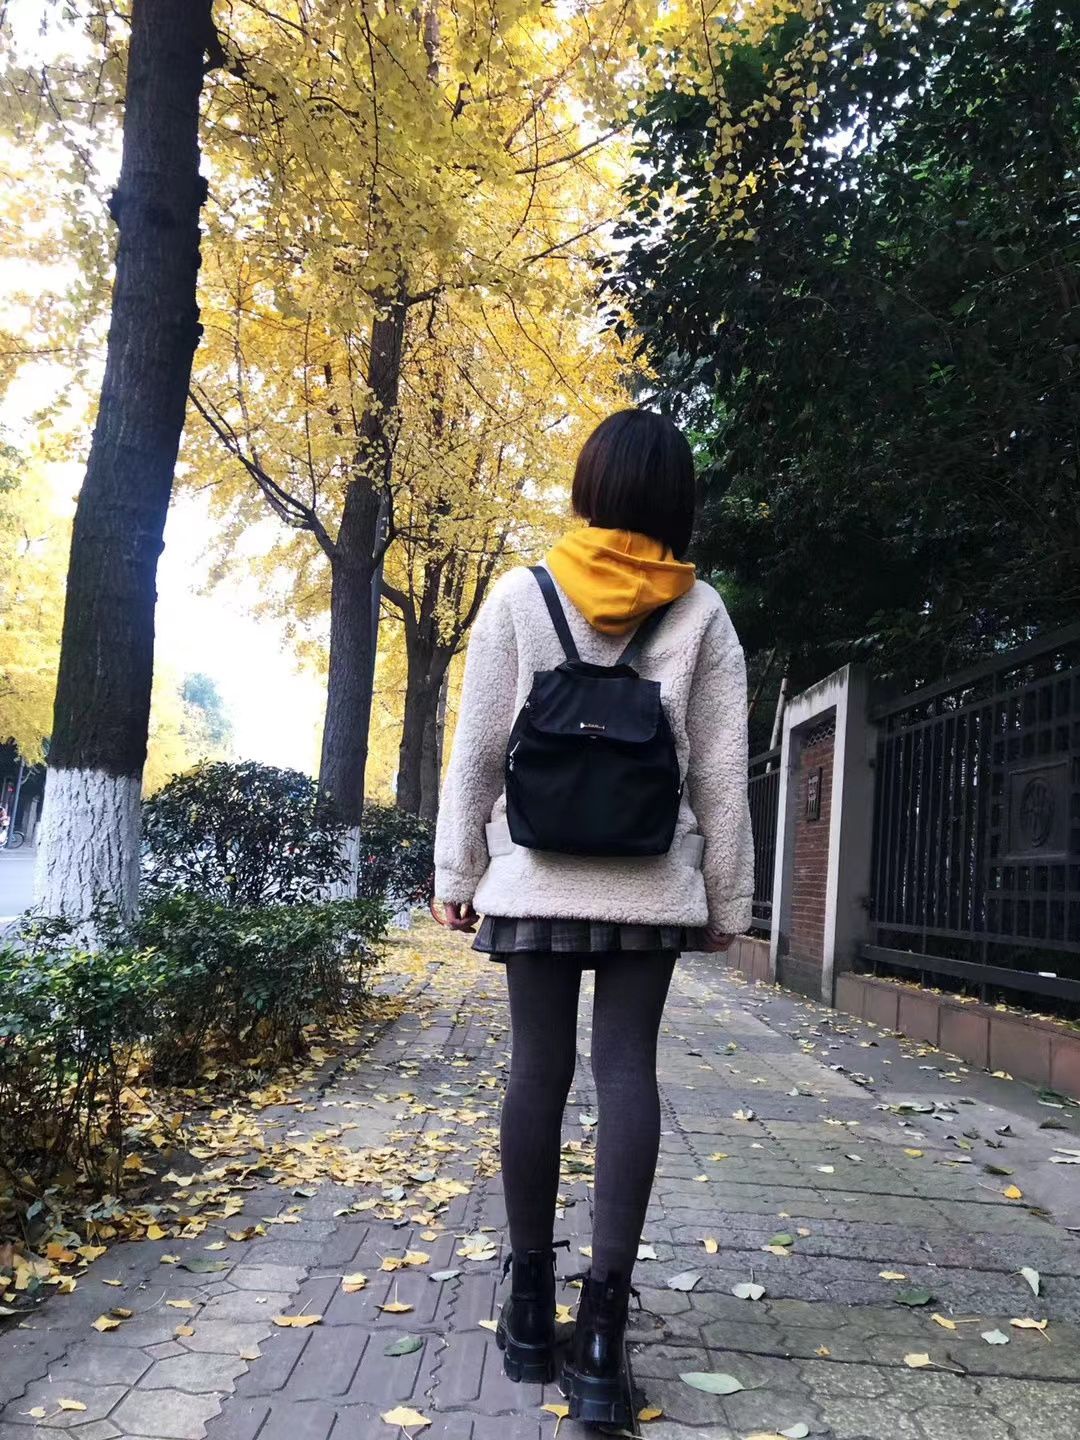 Miya with her back turned to the camera, on a sidewalk in the fall